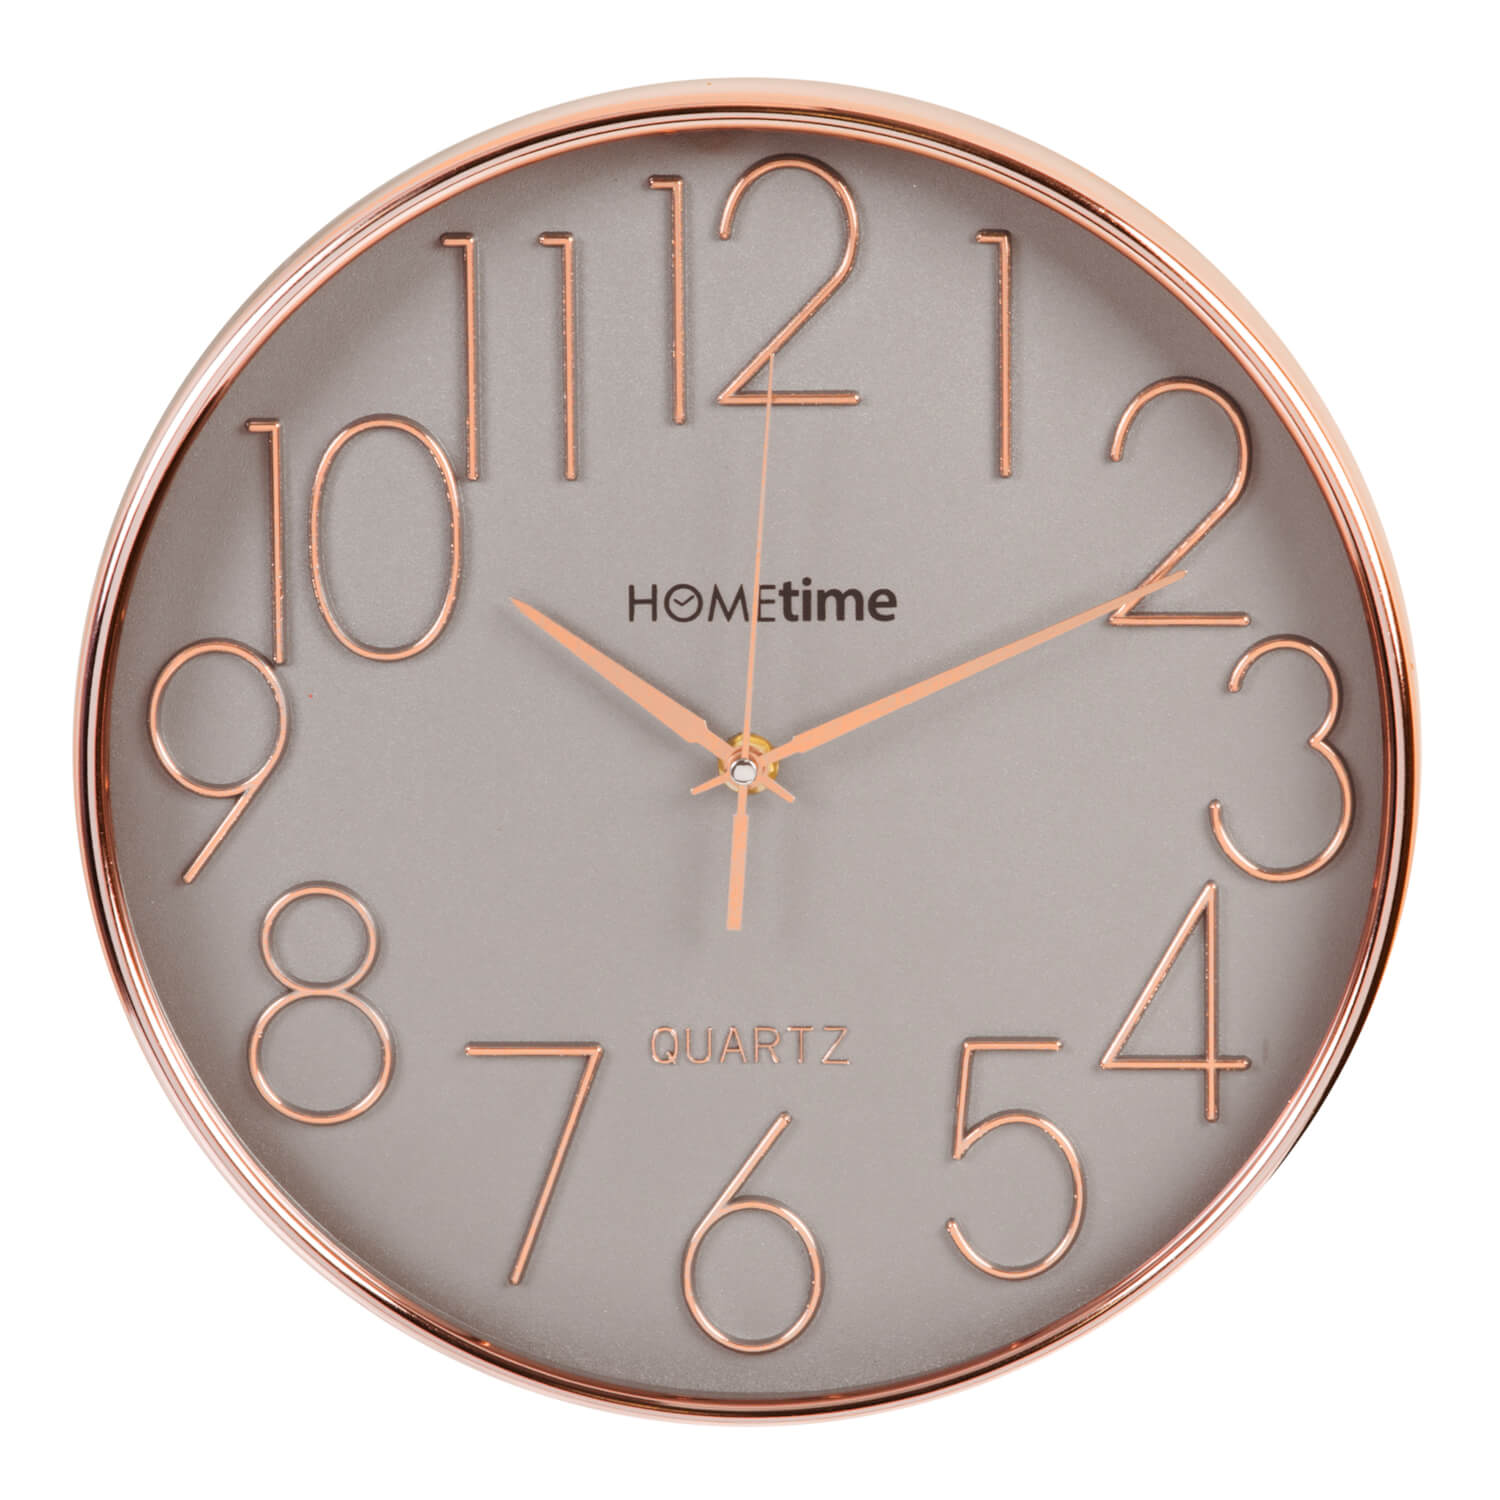 Hometime Wall Clock 30cm - Gold 1 Shaws Department Stores